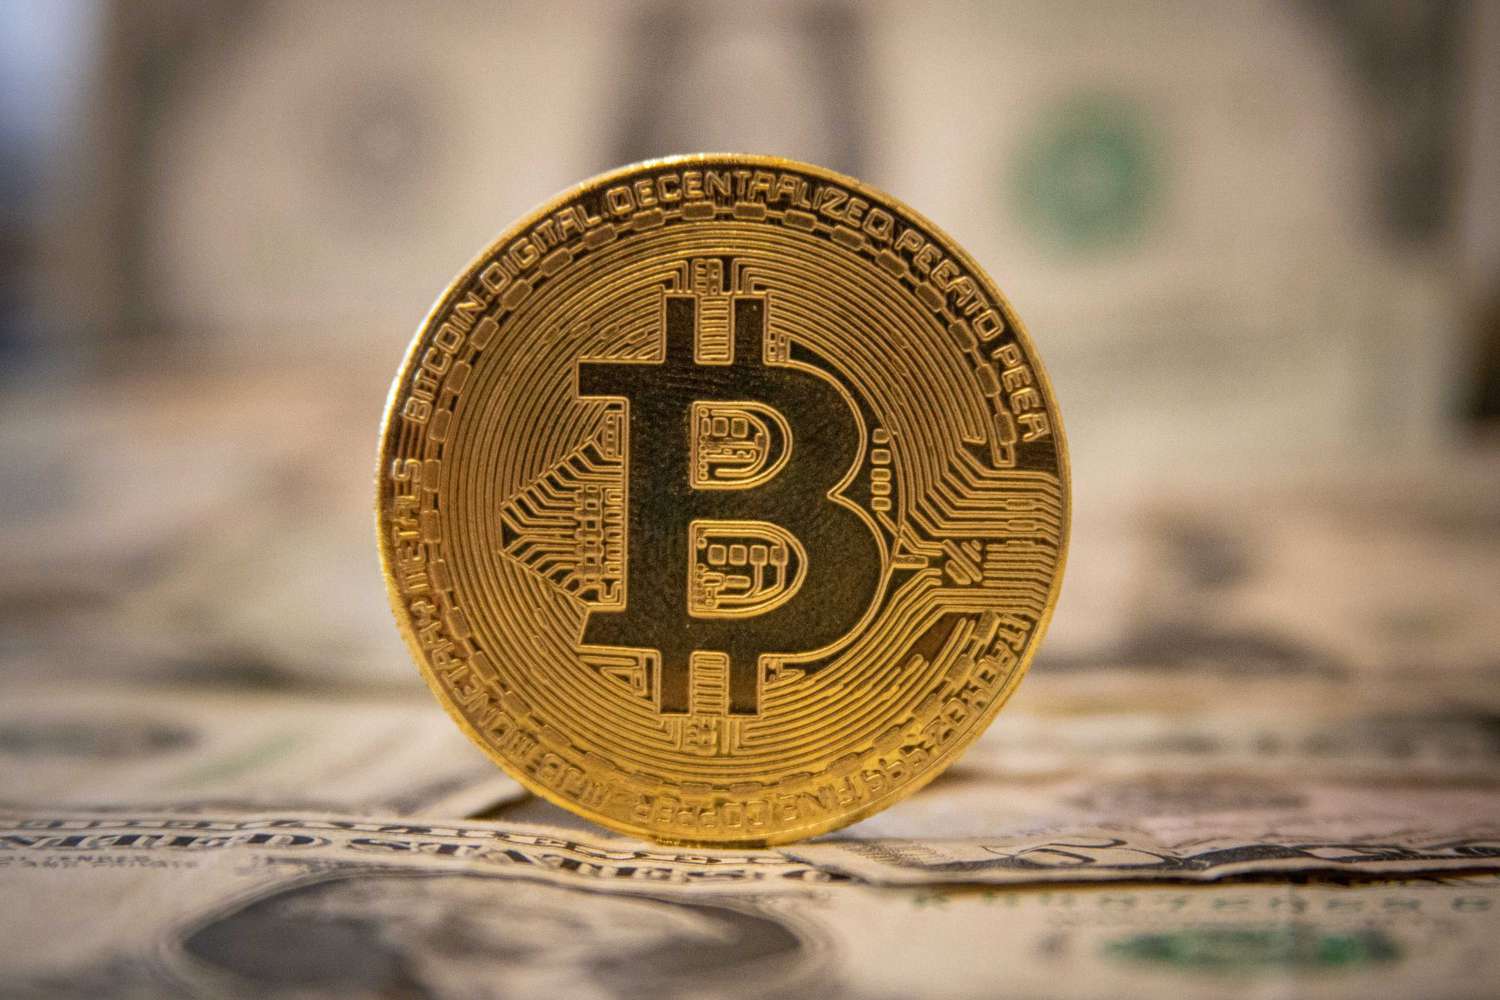 Gold bitcoin on top of money